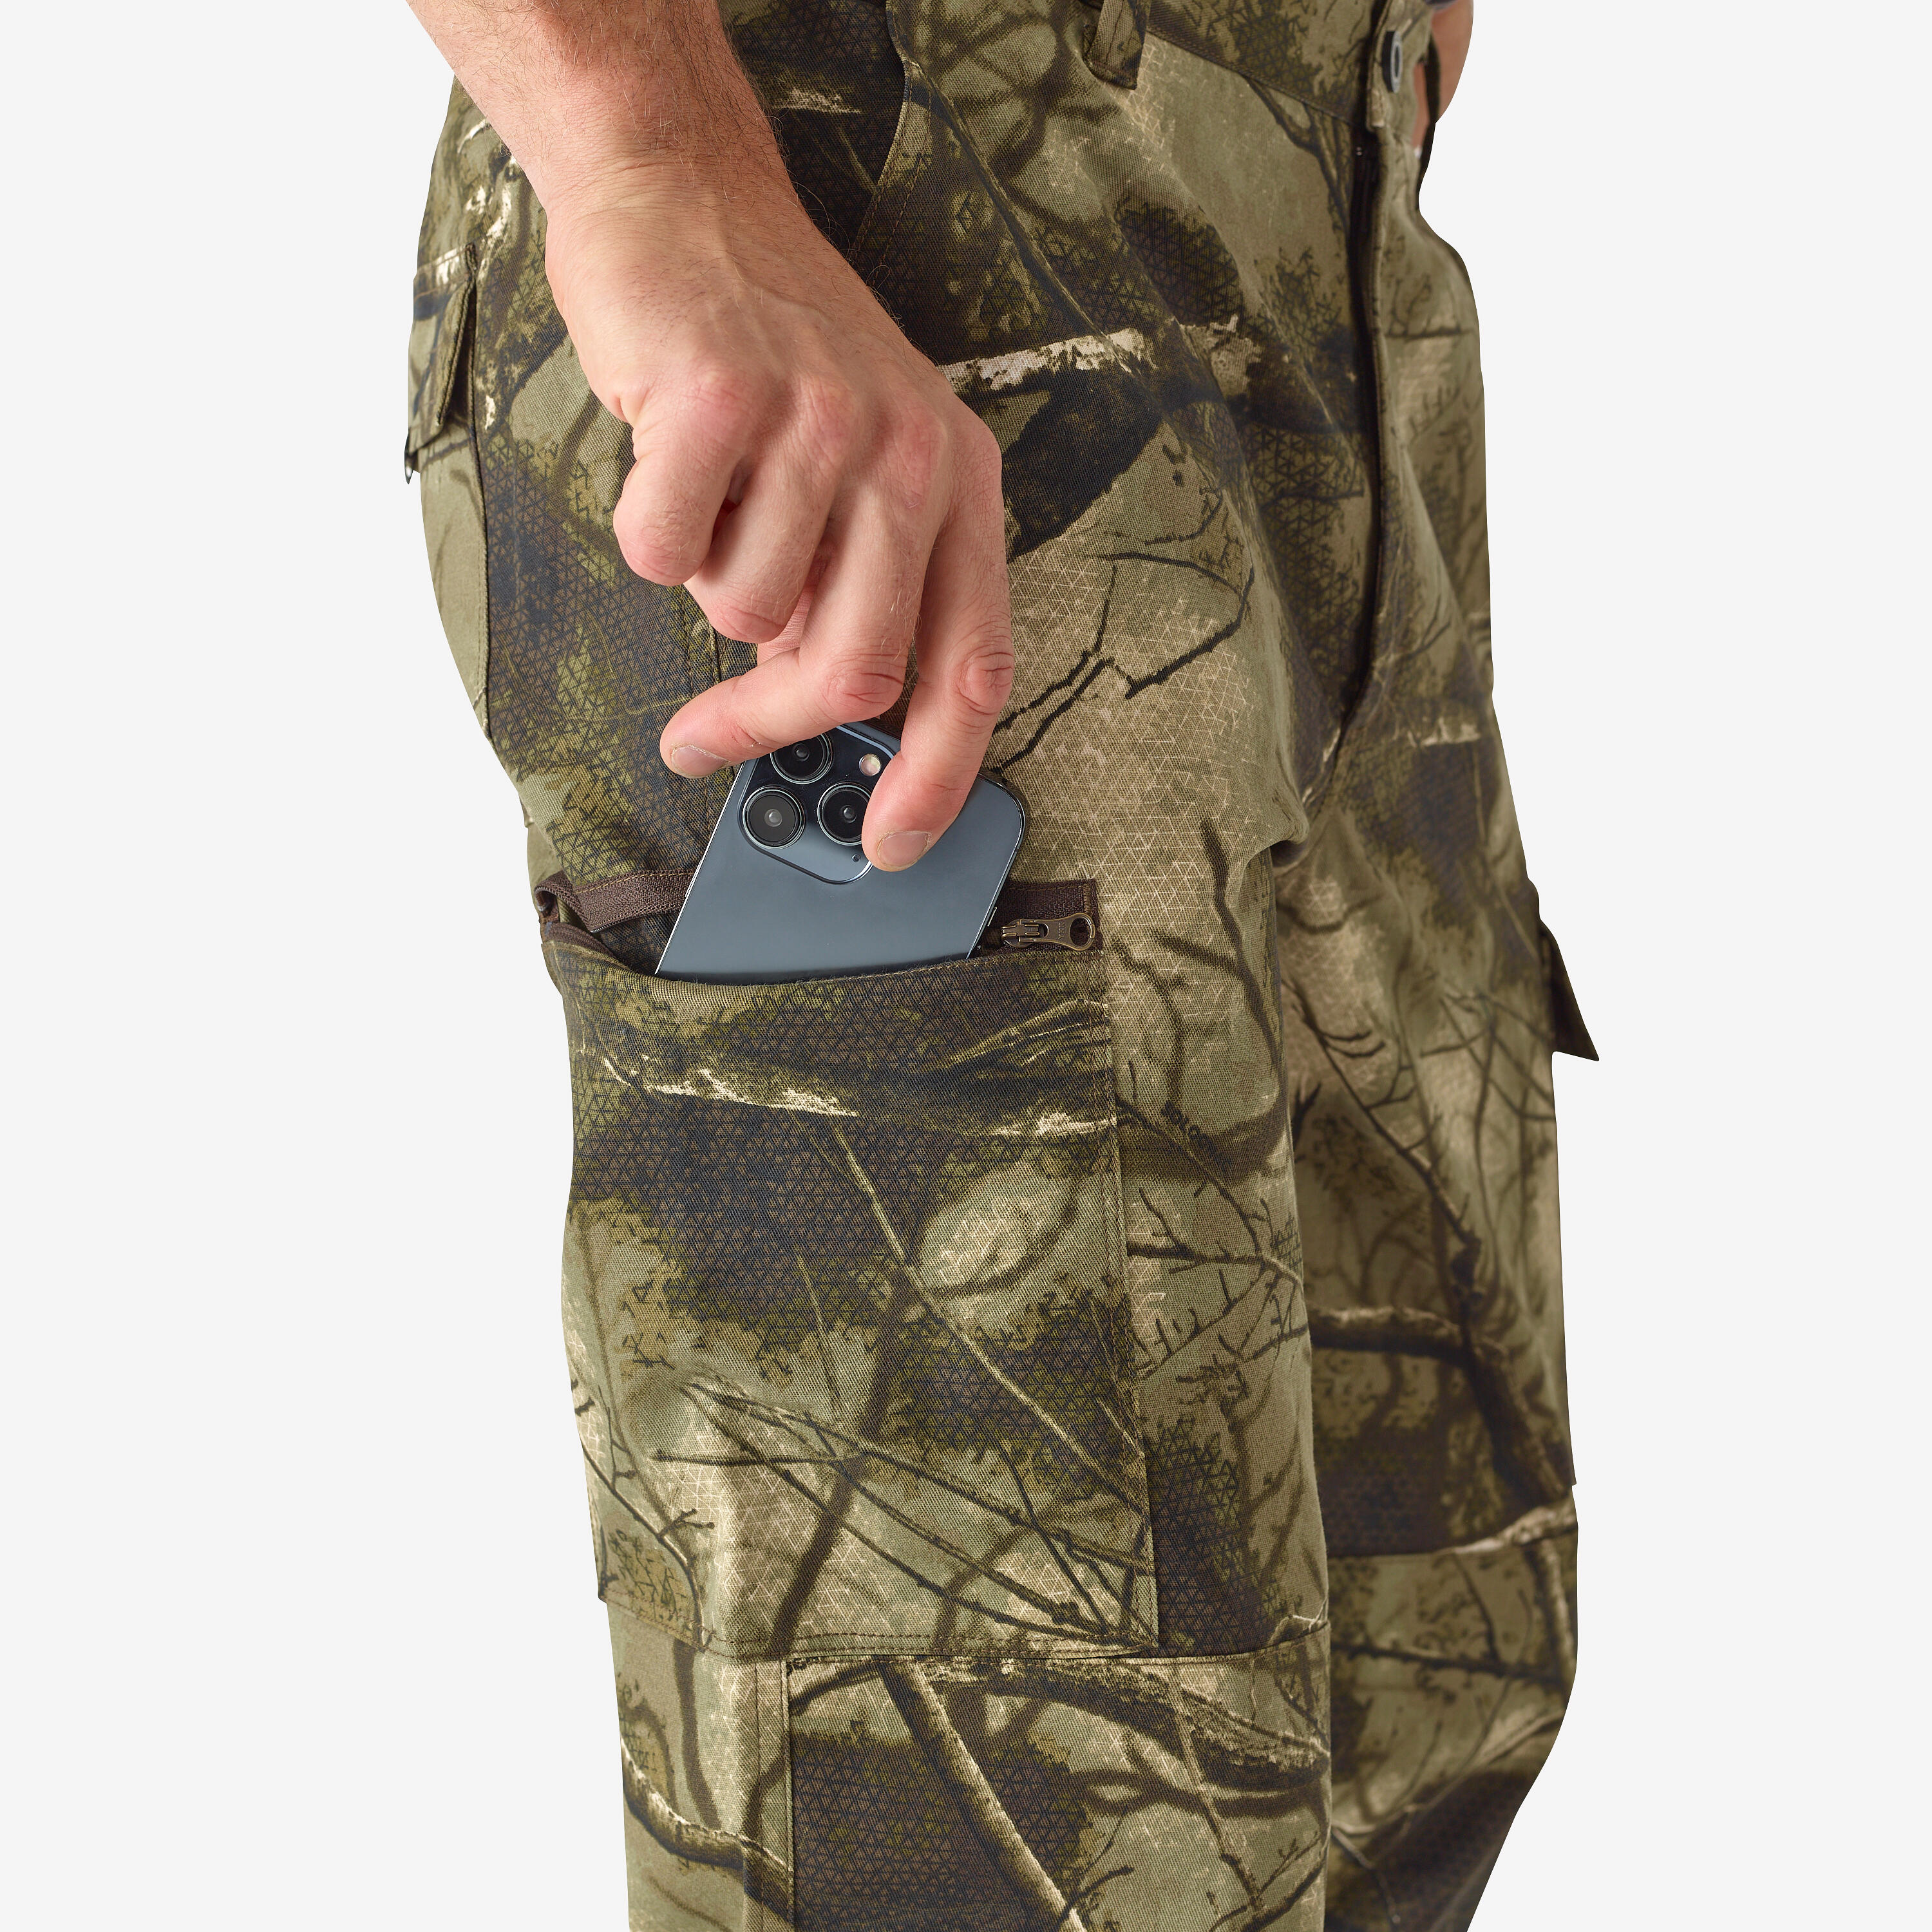 HUNTING BREATHABLE SILENT COTTON TROUSERS 100 TREEMETIC CAMOUFLAGE 5/6